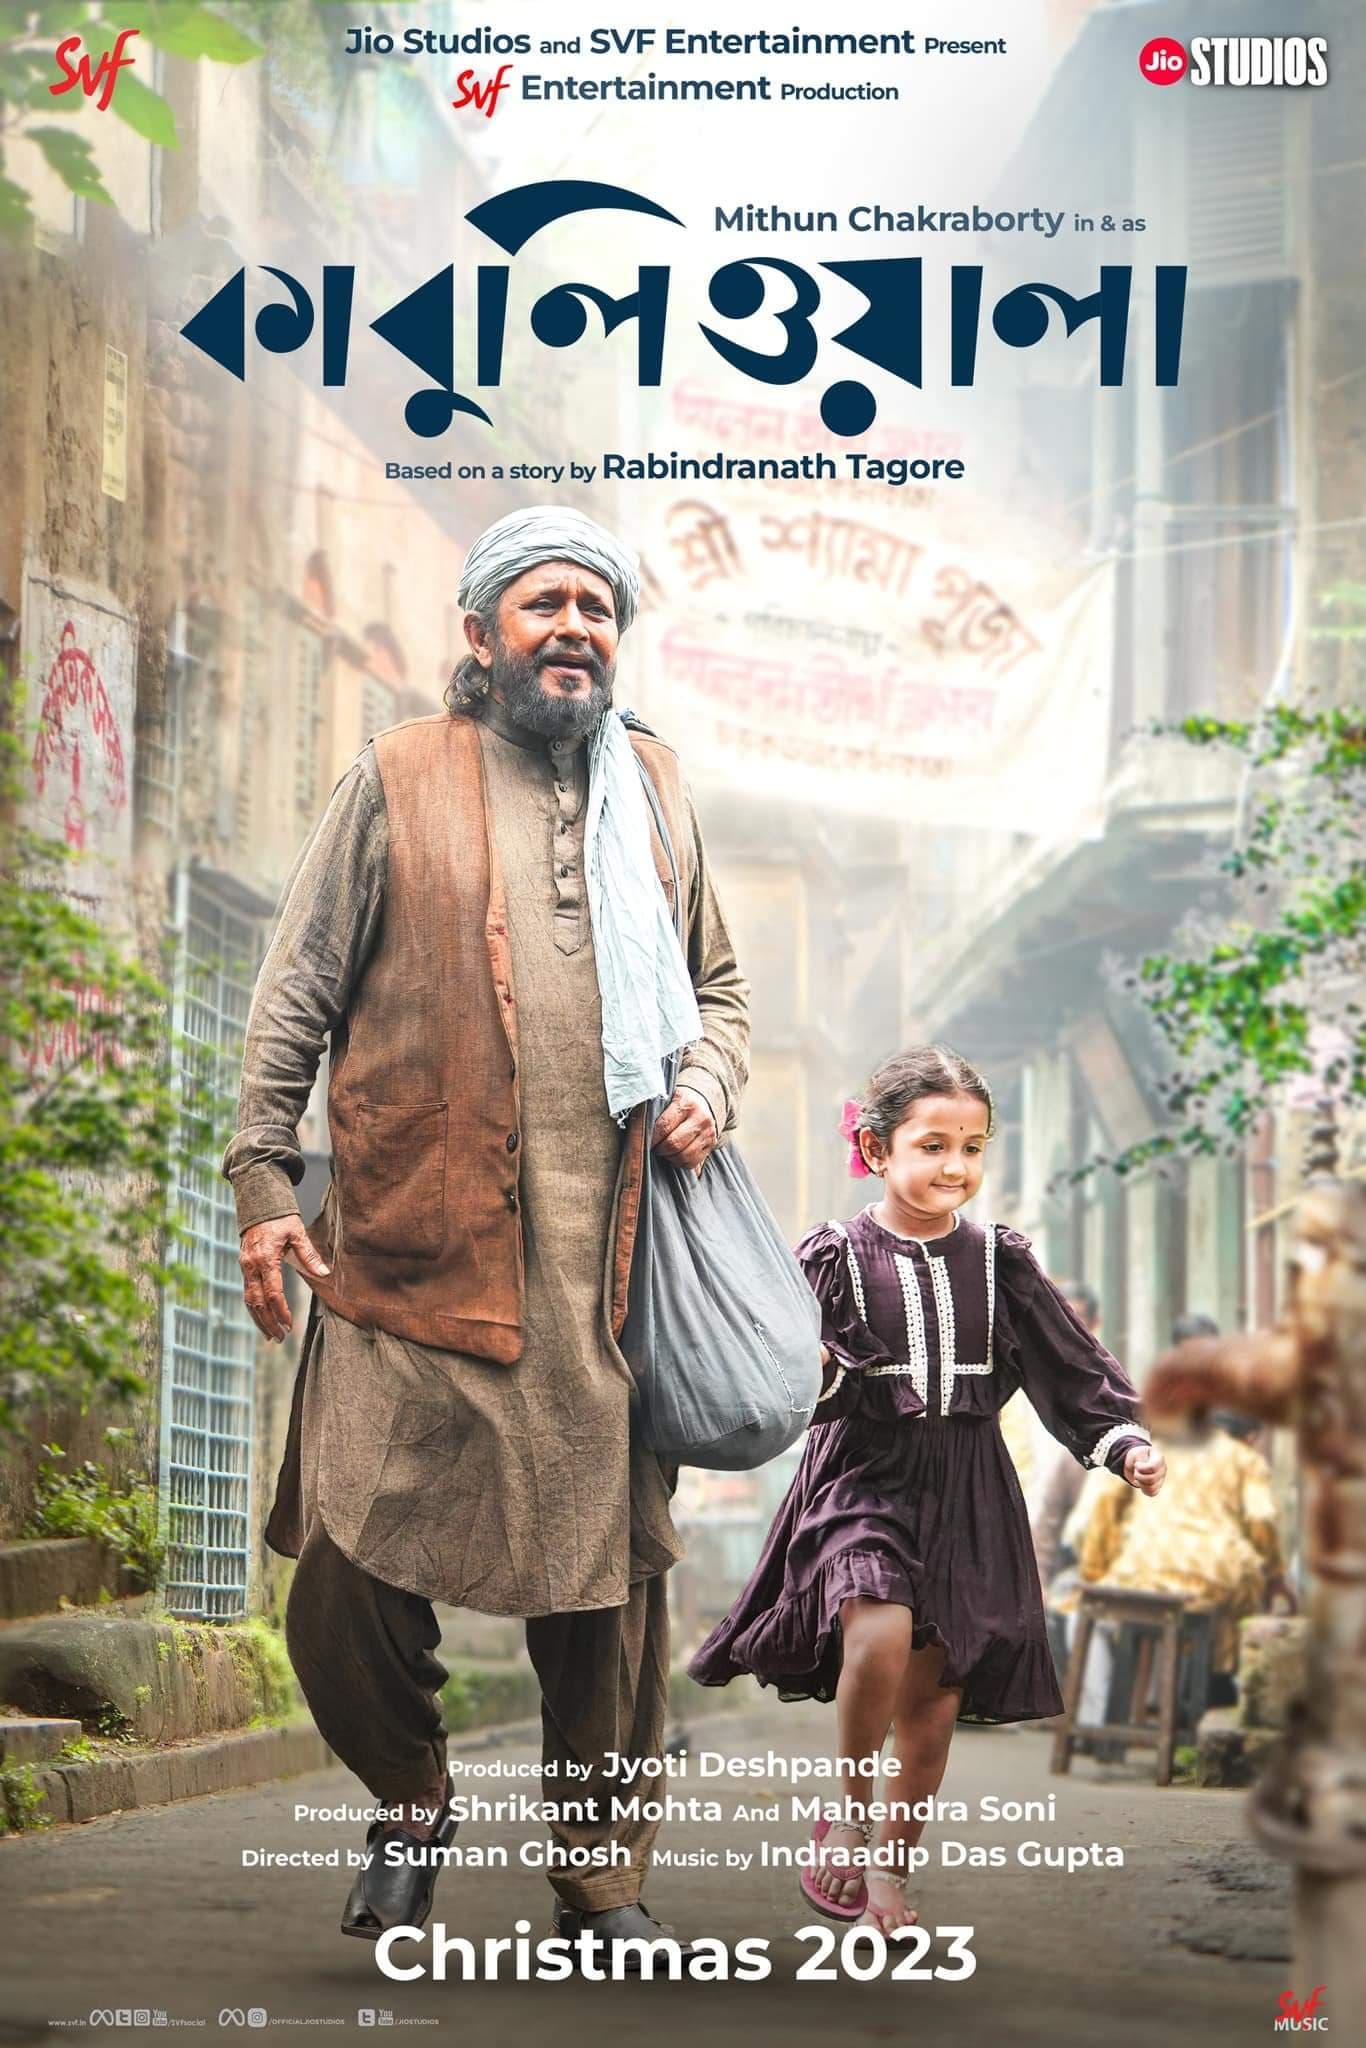 Poster for the movie "Kabuliwala"